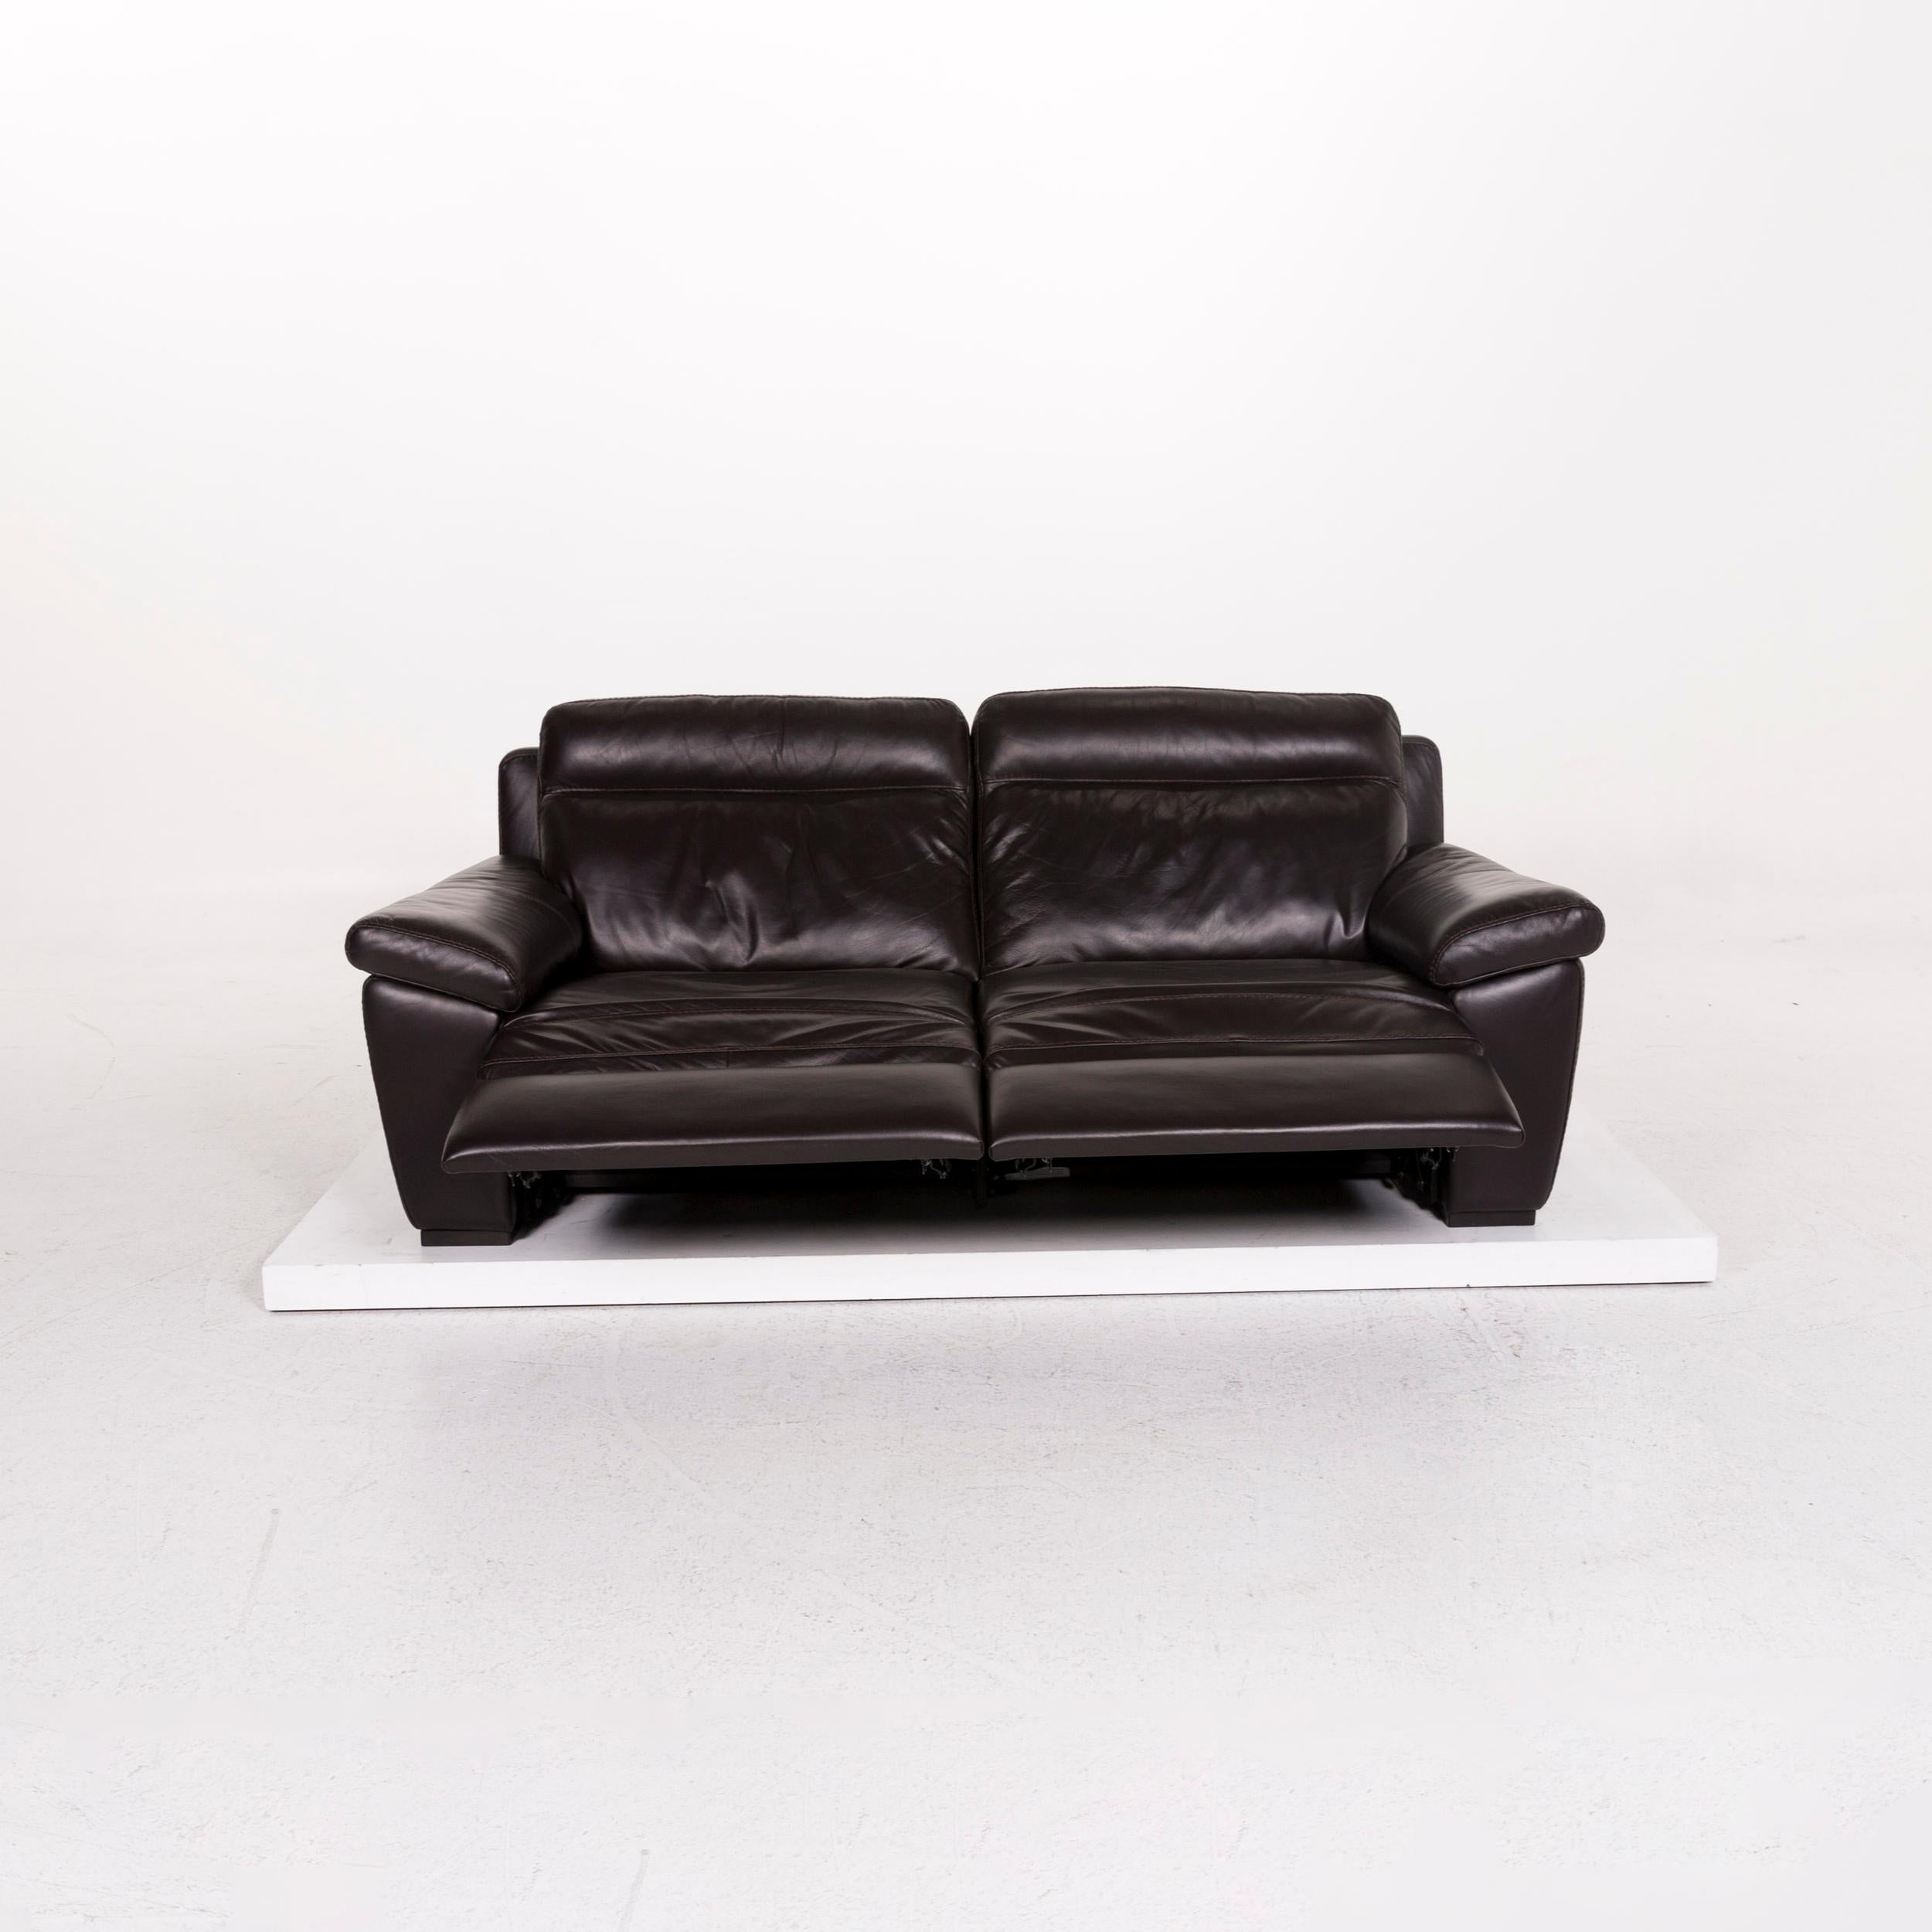 We bring to you a Natuzzi leather sofa brown dark brown three-seat function relax function couch.
 
 

 Product measurements in centimeters:
 

Depth 97
Width 211
Height 90
Seat-height 42
Rest-height 56
Seat-depth 54
Seat-width